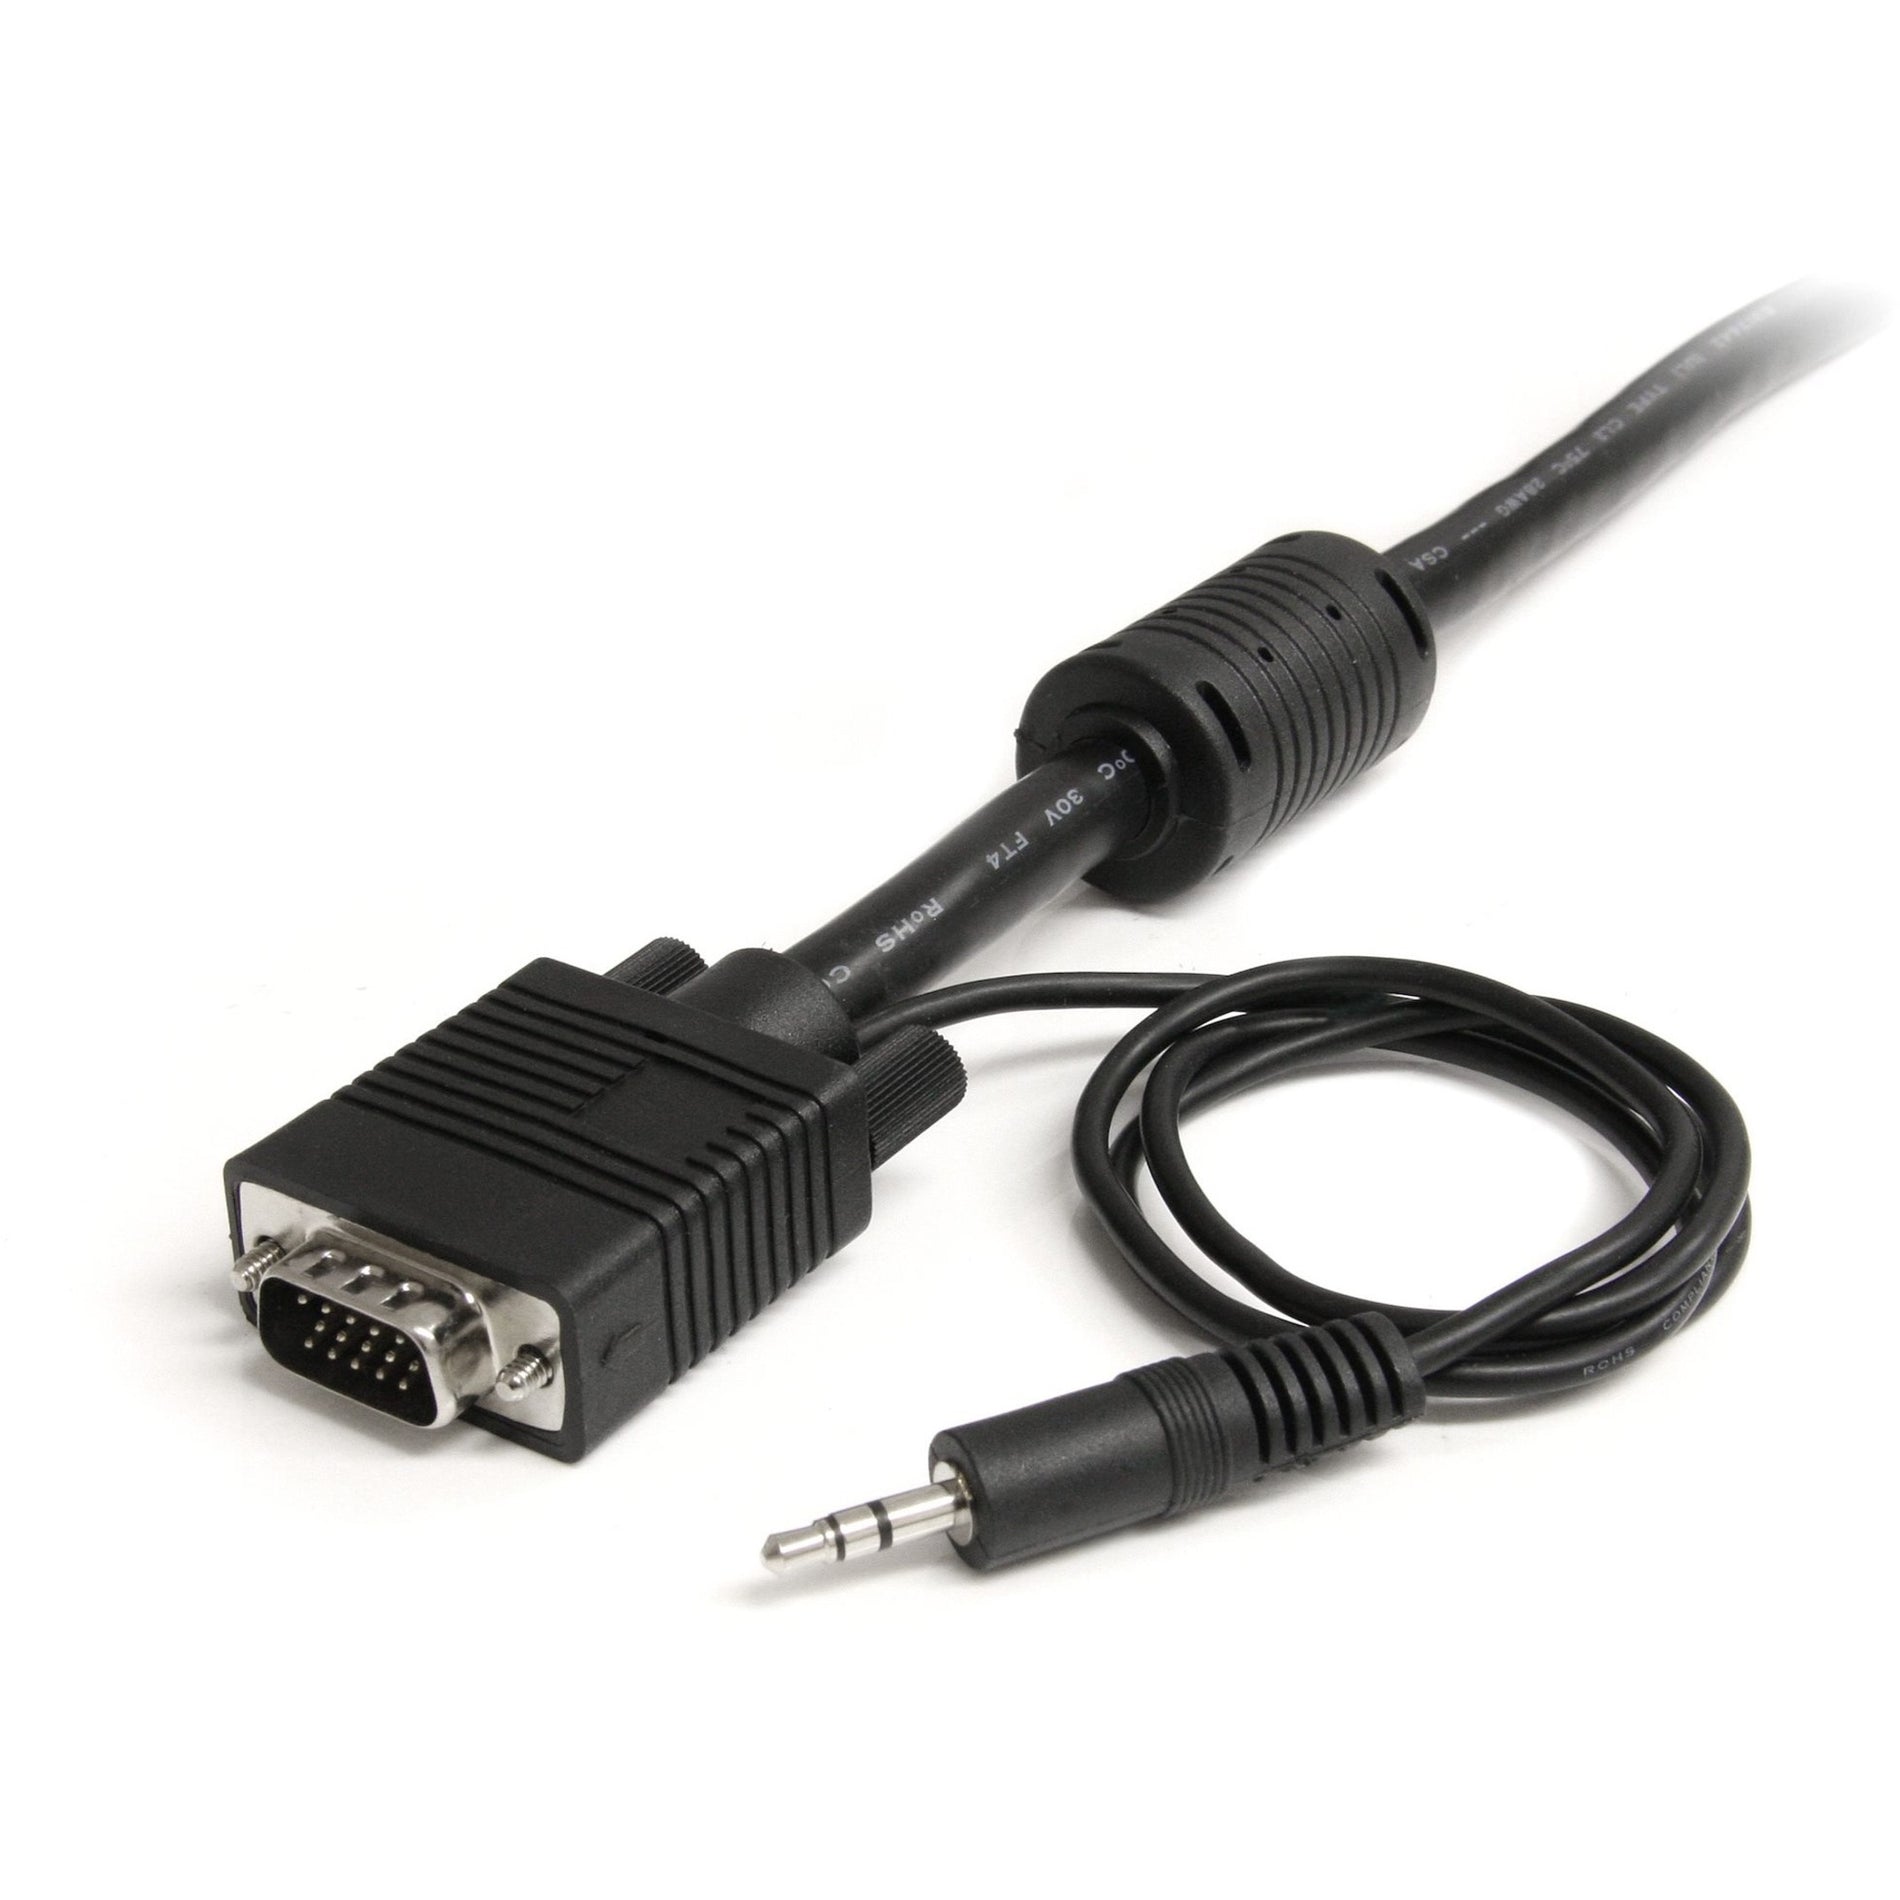 StarTech.com MXTHQMM15A 15 ft Coax High Resolution Monitor VGA Cable with Audio, Male to Male